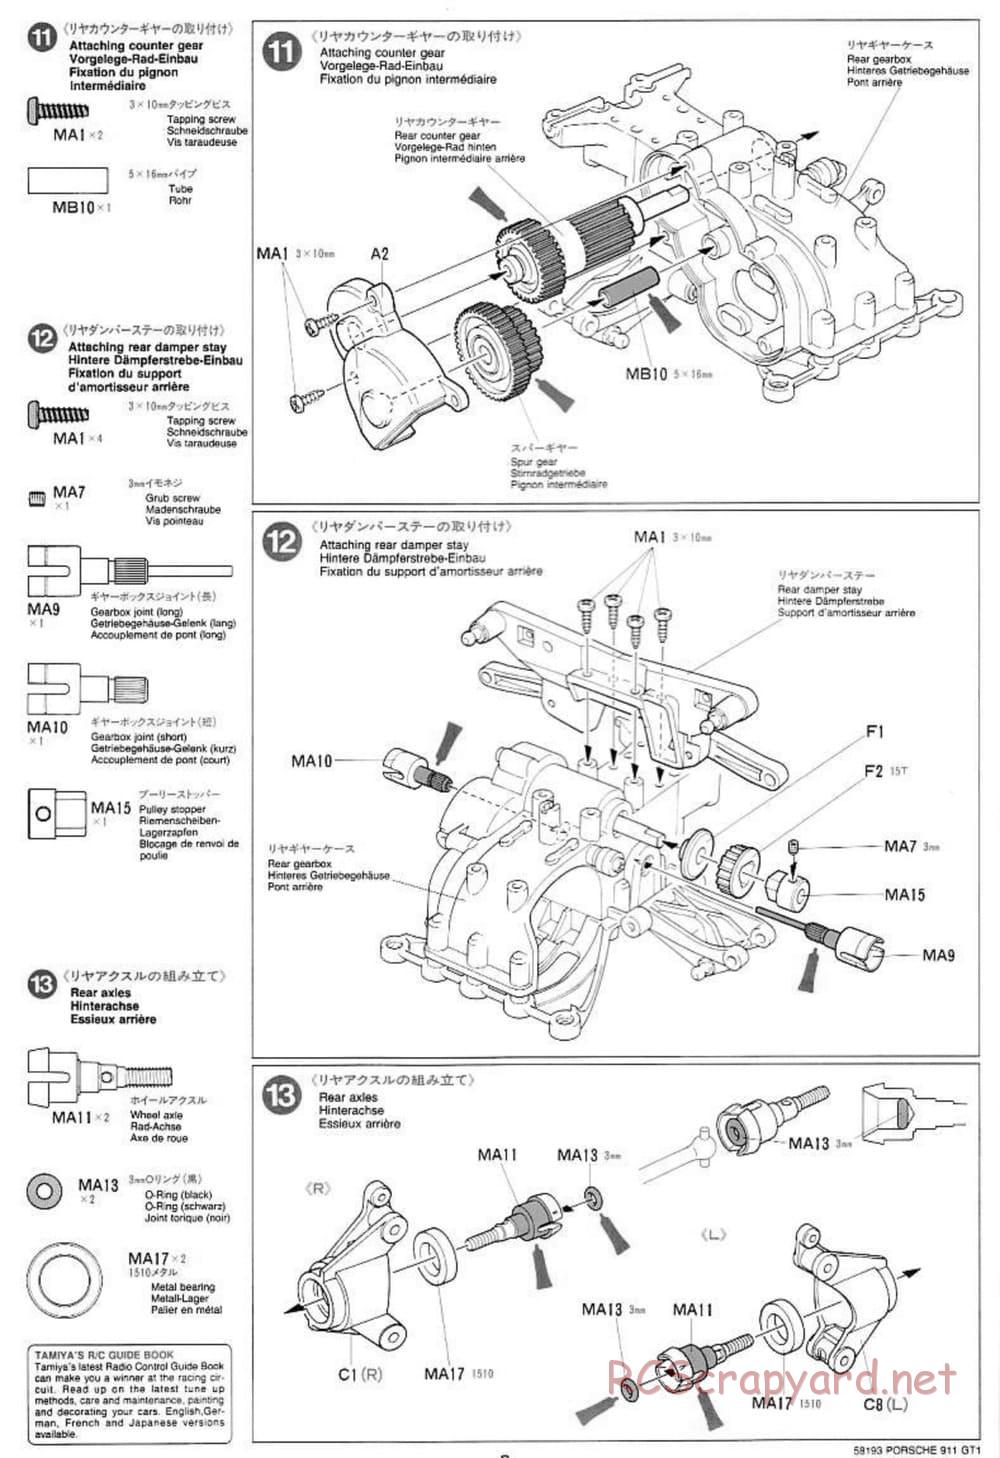 Tamiya - Porsche 911 GT1 - TA-03RS Chassis - Manual - Page 8